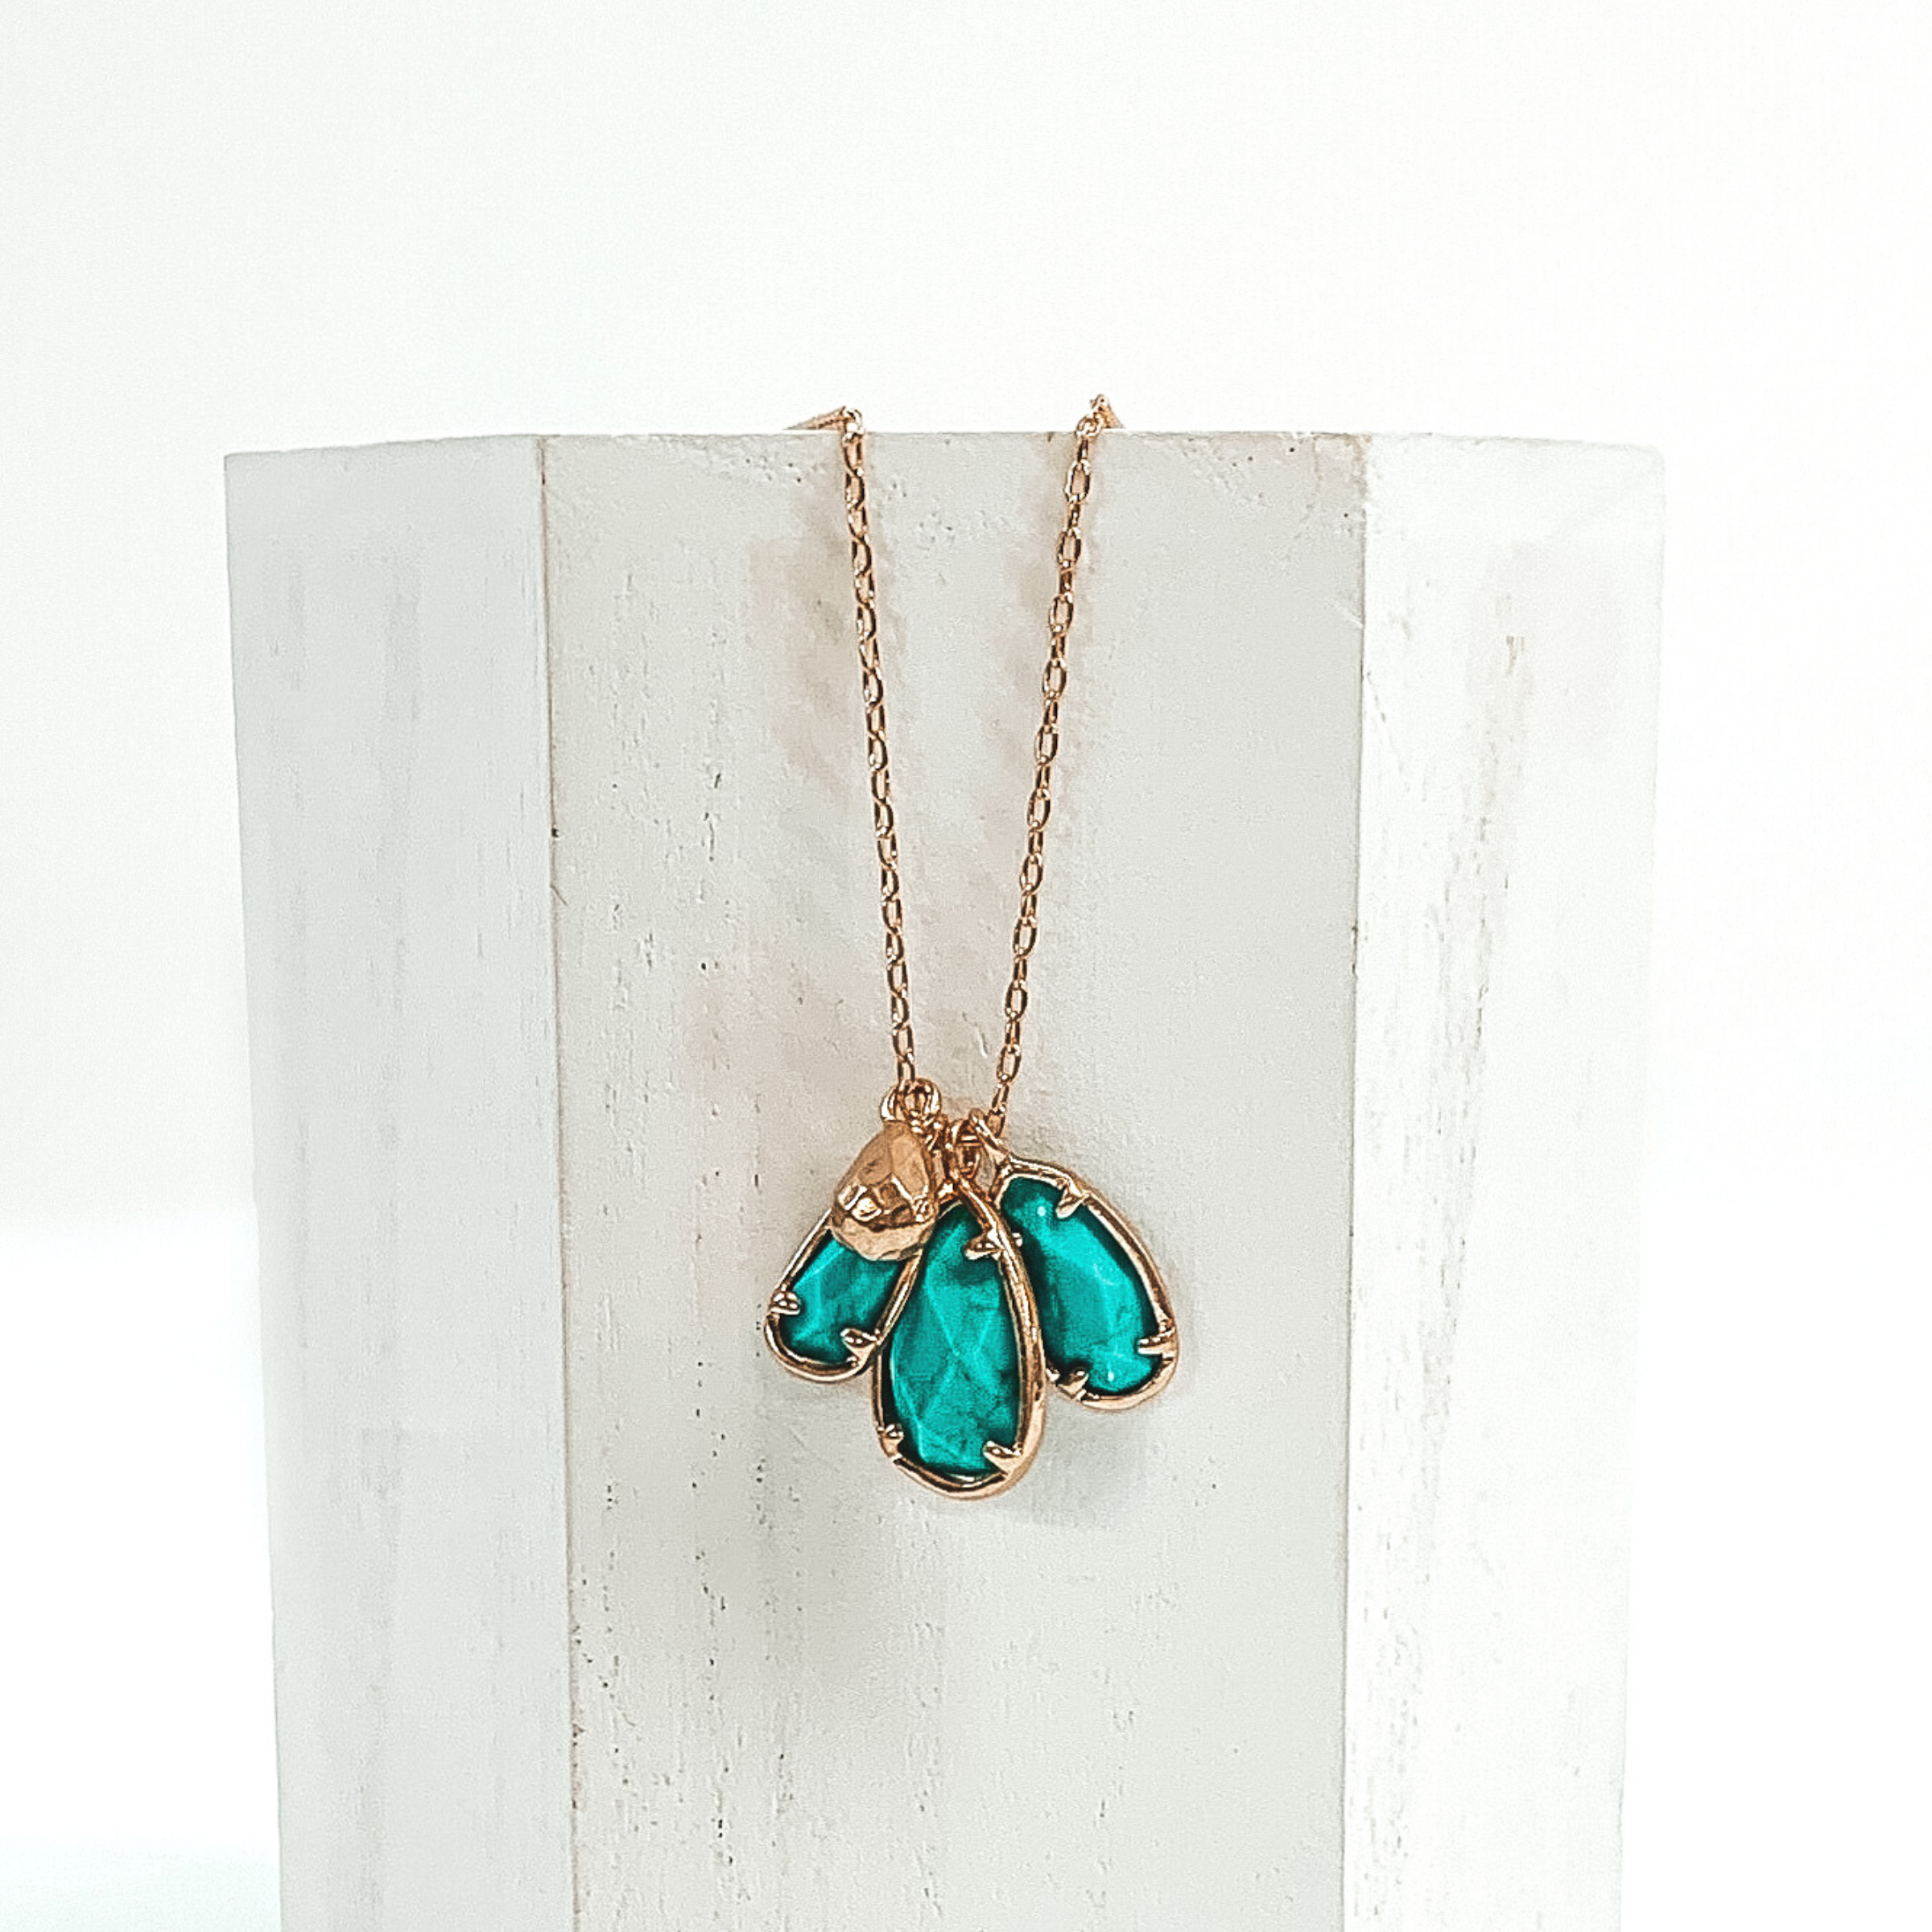 Small gold chain with three turquoise marbled teardrop stone pendants outlined in gold. It also has a tiny gold teardrop pendant. This necklace is pictured laying a white piece of wood on a white background.